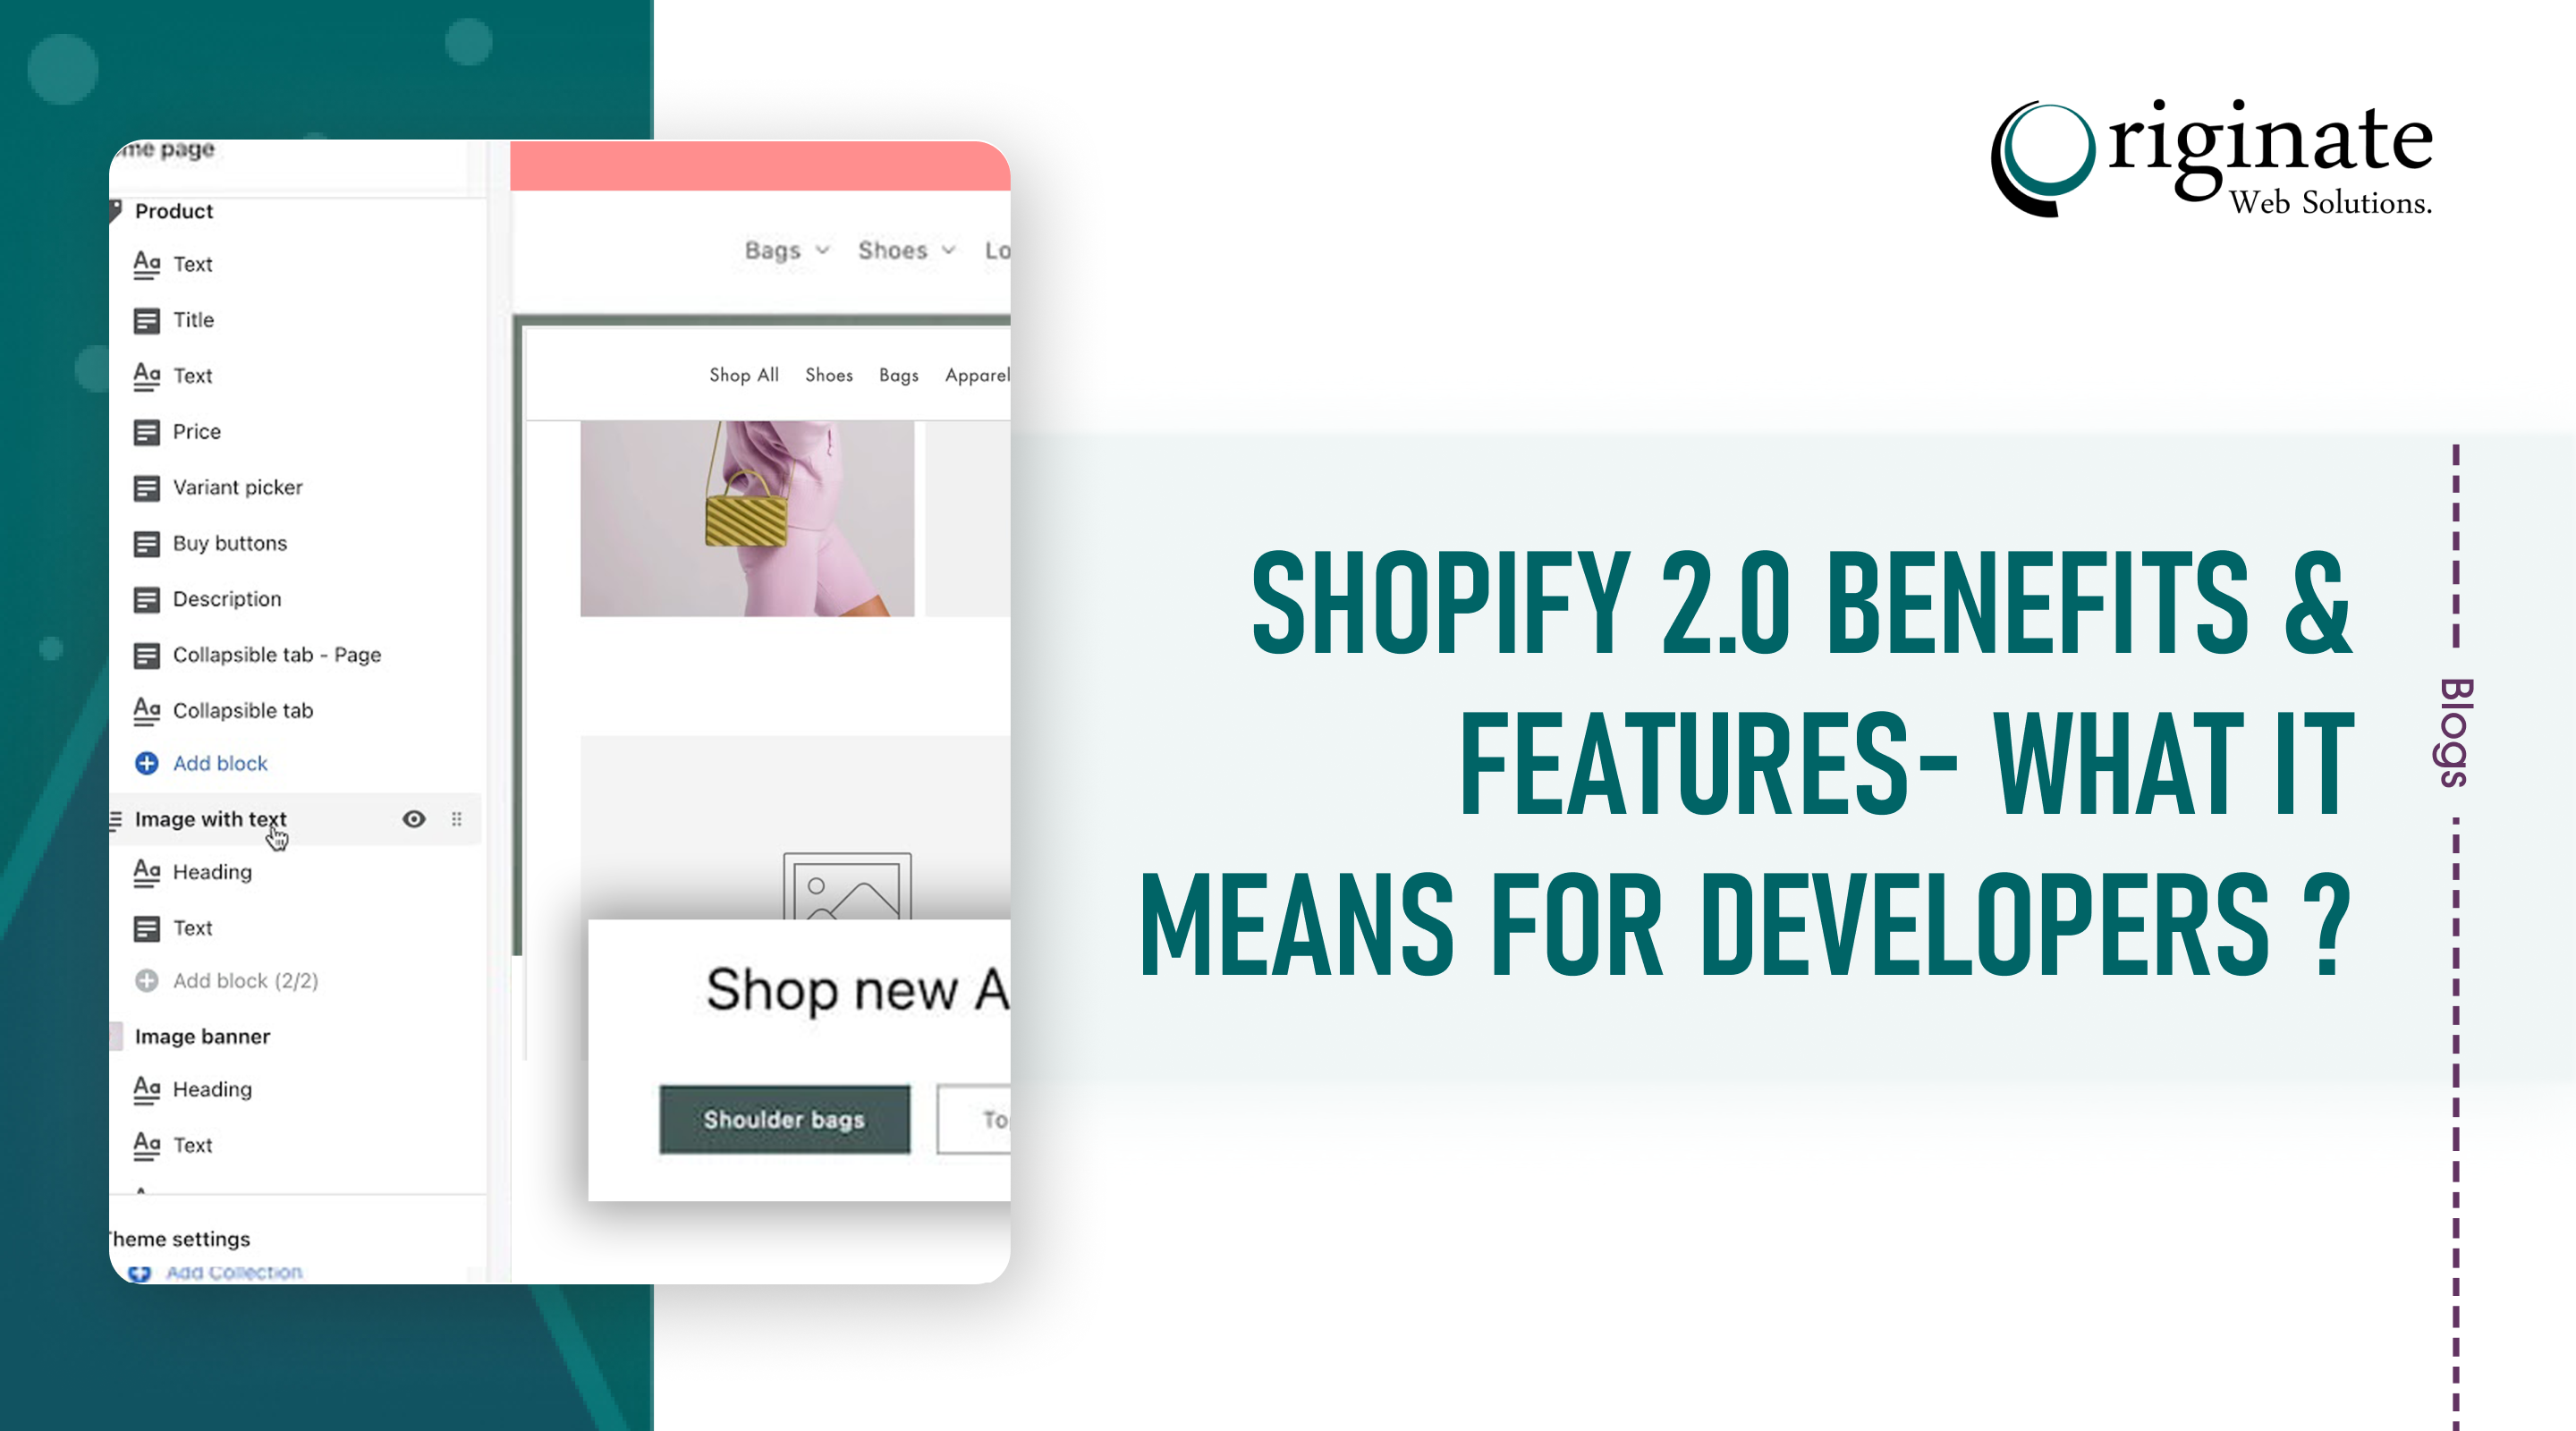 Shopify 2.0 Benefits & Features- What It Means For Developers?